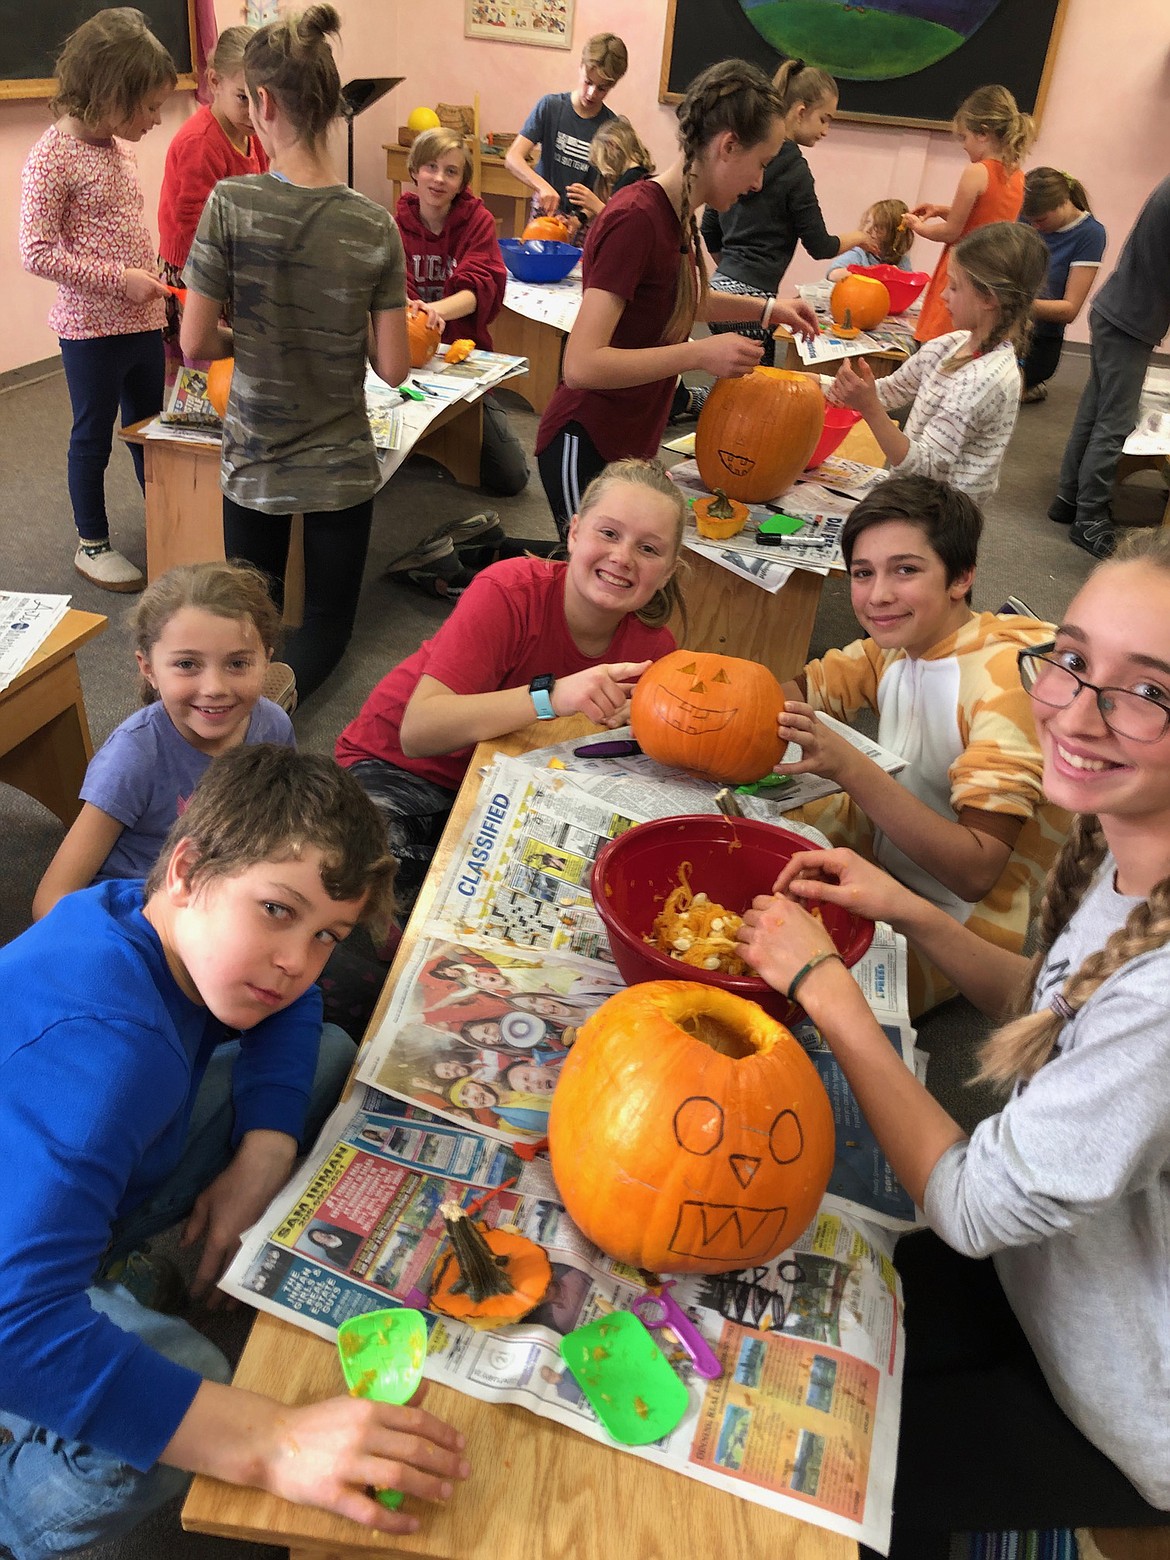 (Photo courtesy SANDPOINT WALDORF SCHOOL)Sandpoint Waldorf School students take a break in their creation of jack-o'-lantern to pose for the camera.